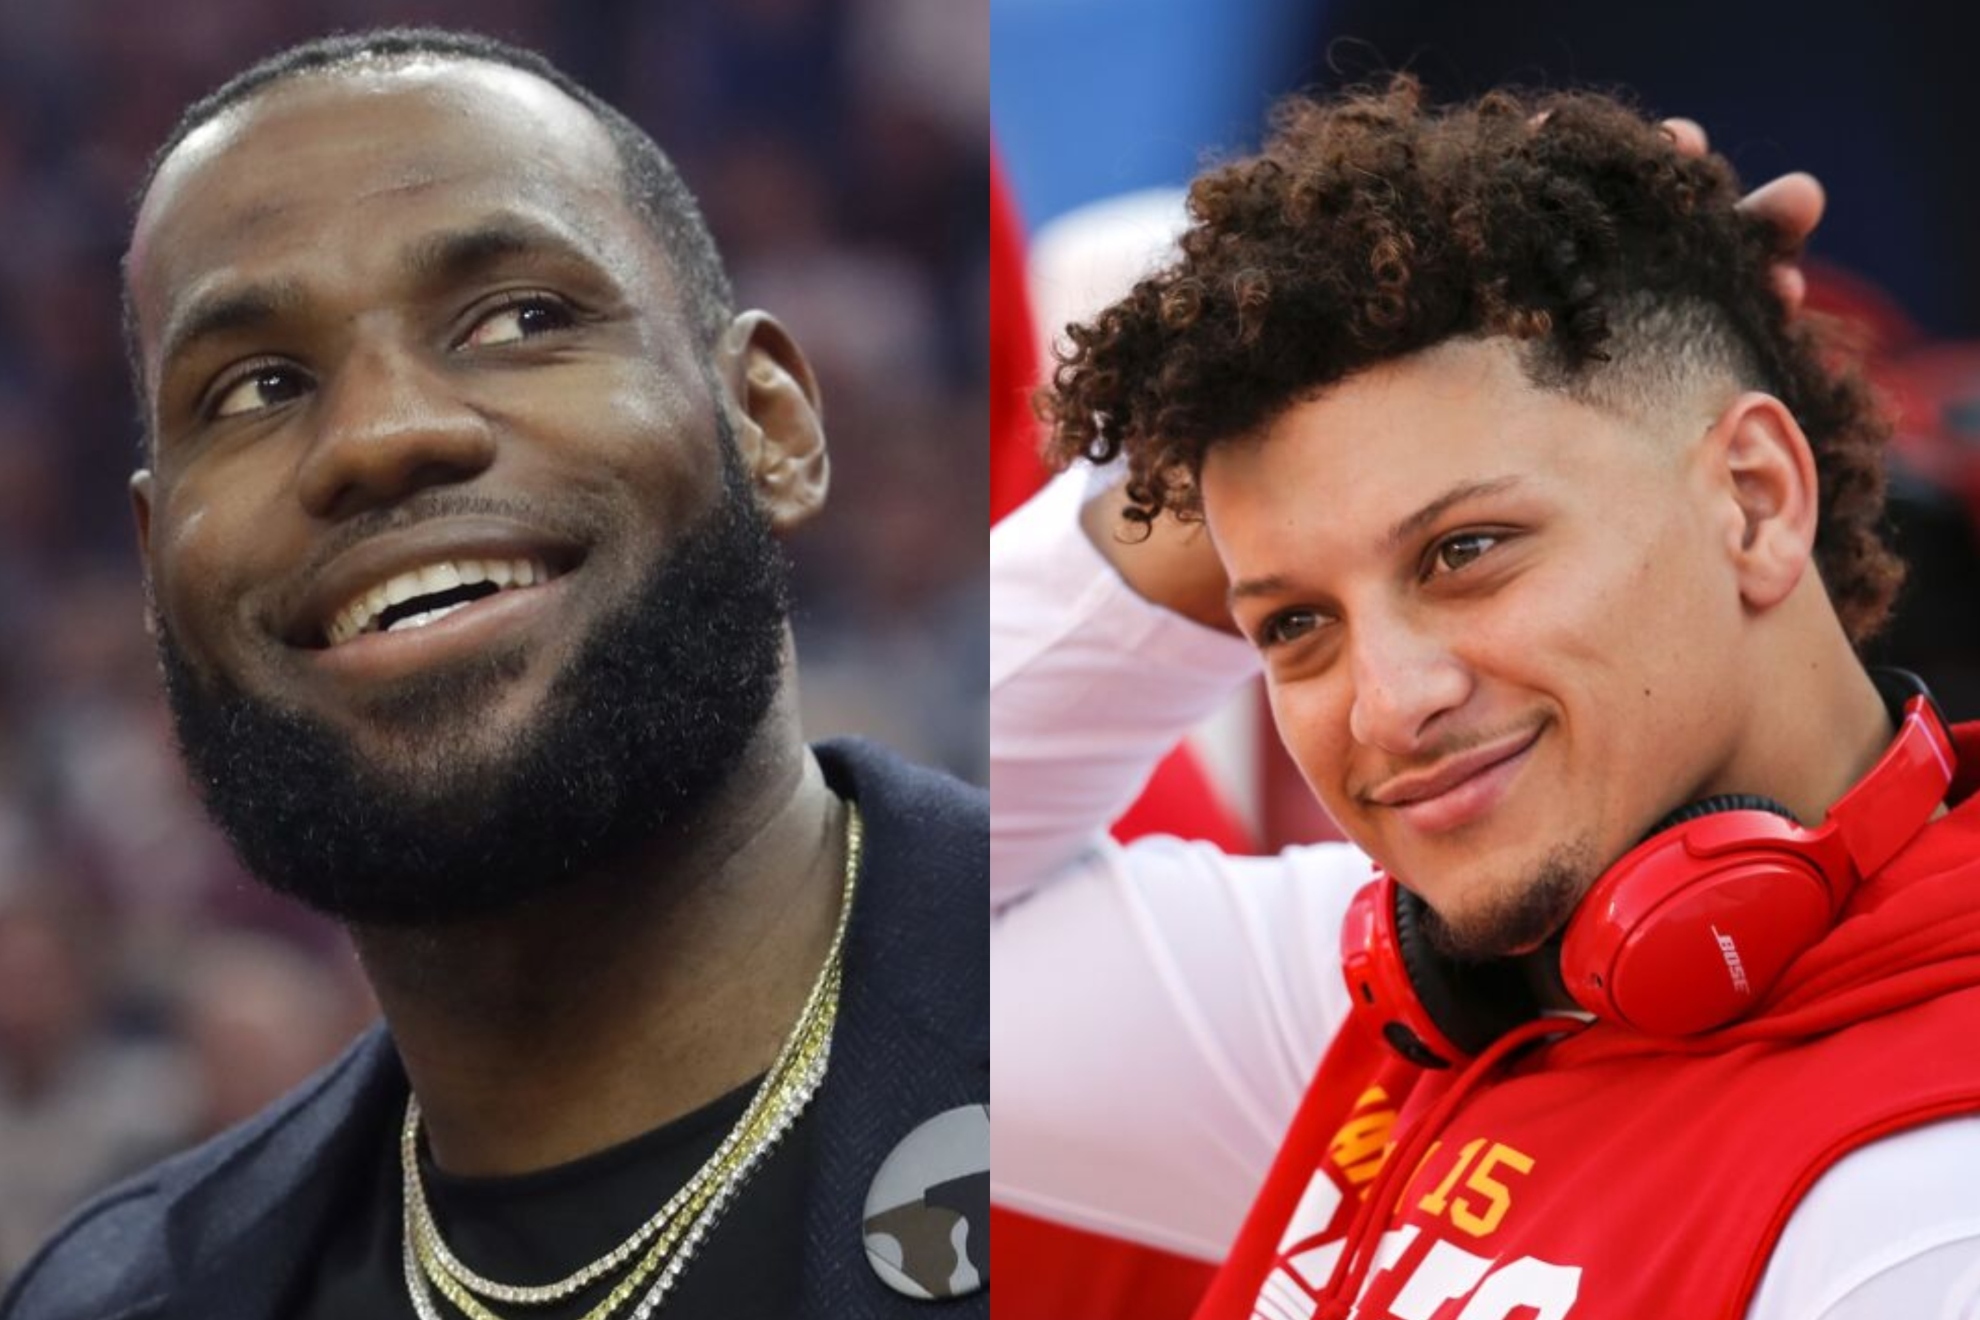 LeBron James highly praises Patrick Mahomes for an insanely difficult play